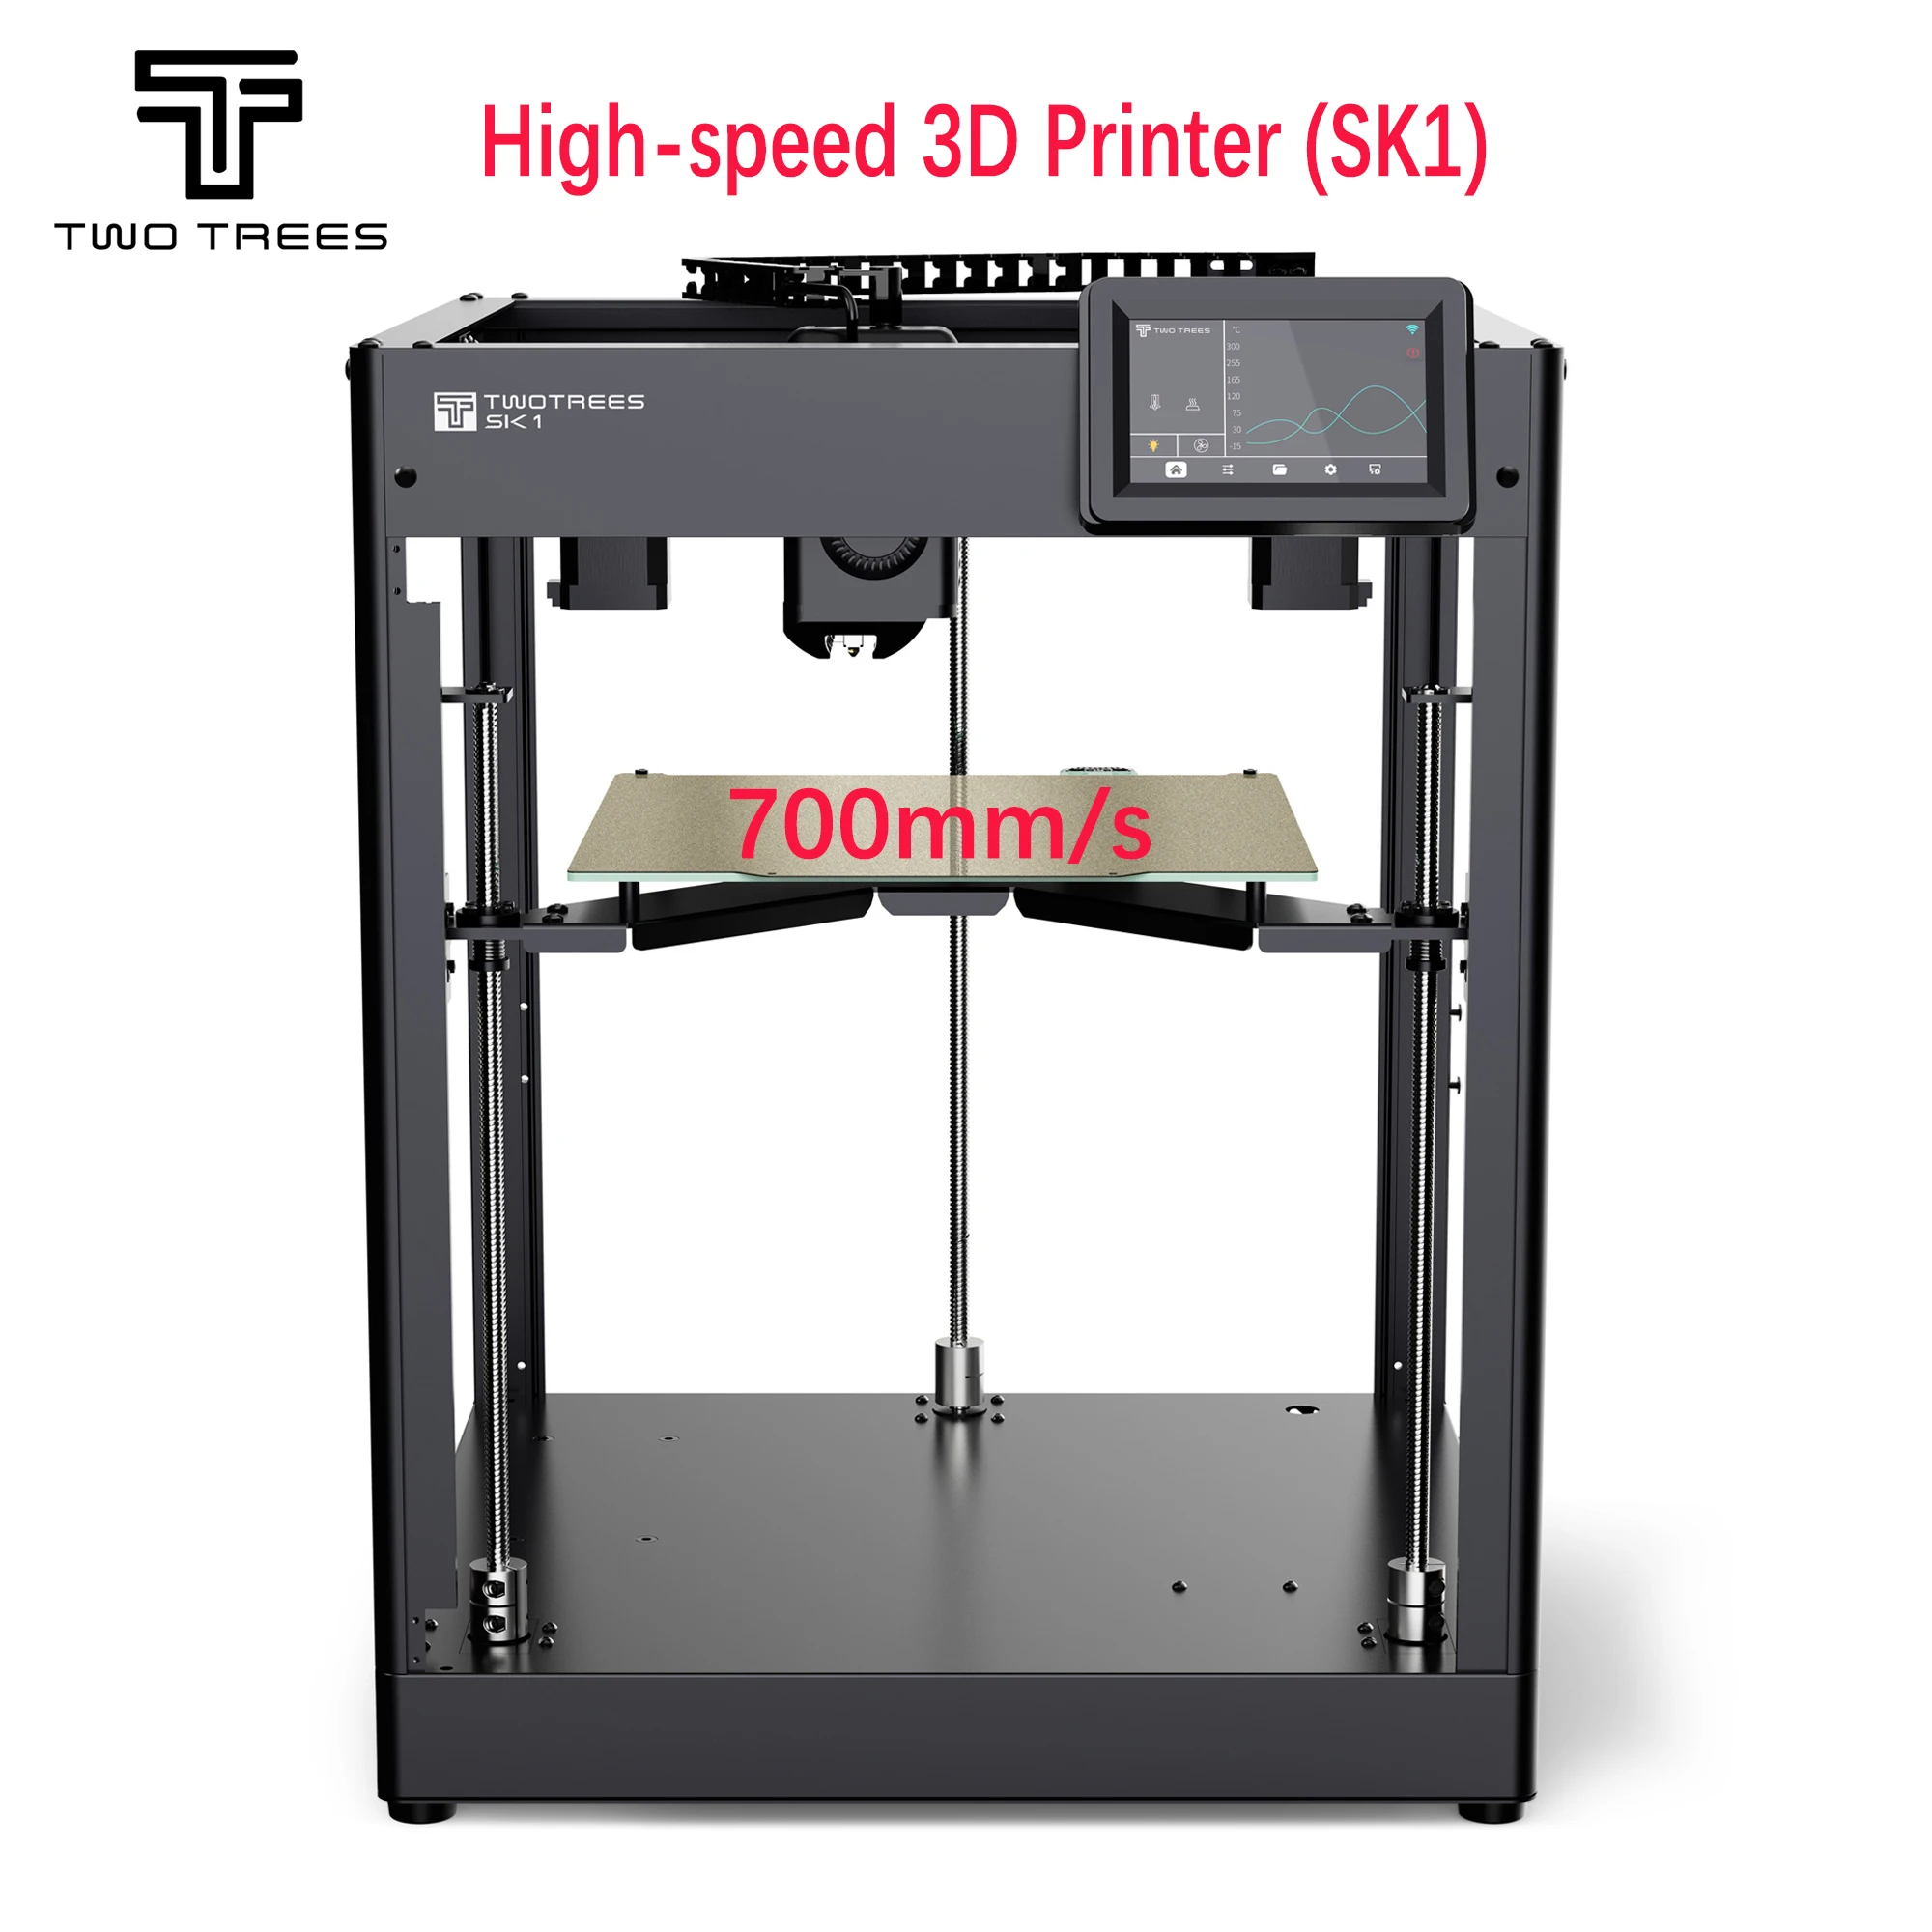 

Twotrees SK1 3D Printer 700mm/s High-Speed Fast Printing Three Z-axis Auto Leveling Linear Guide Rail Dual-gear Direct Extruder